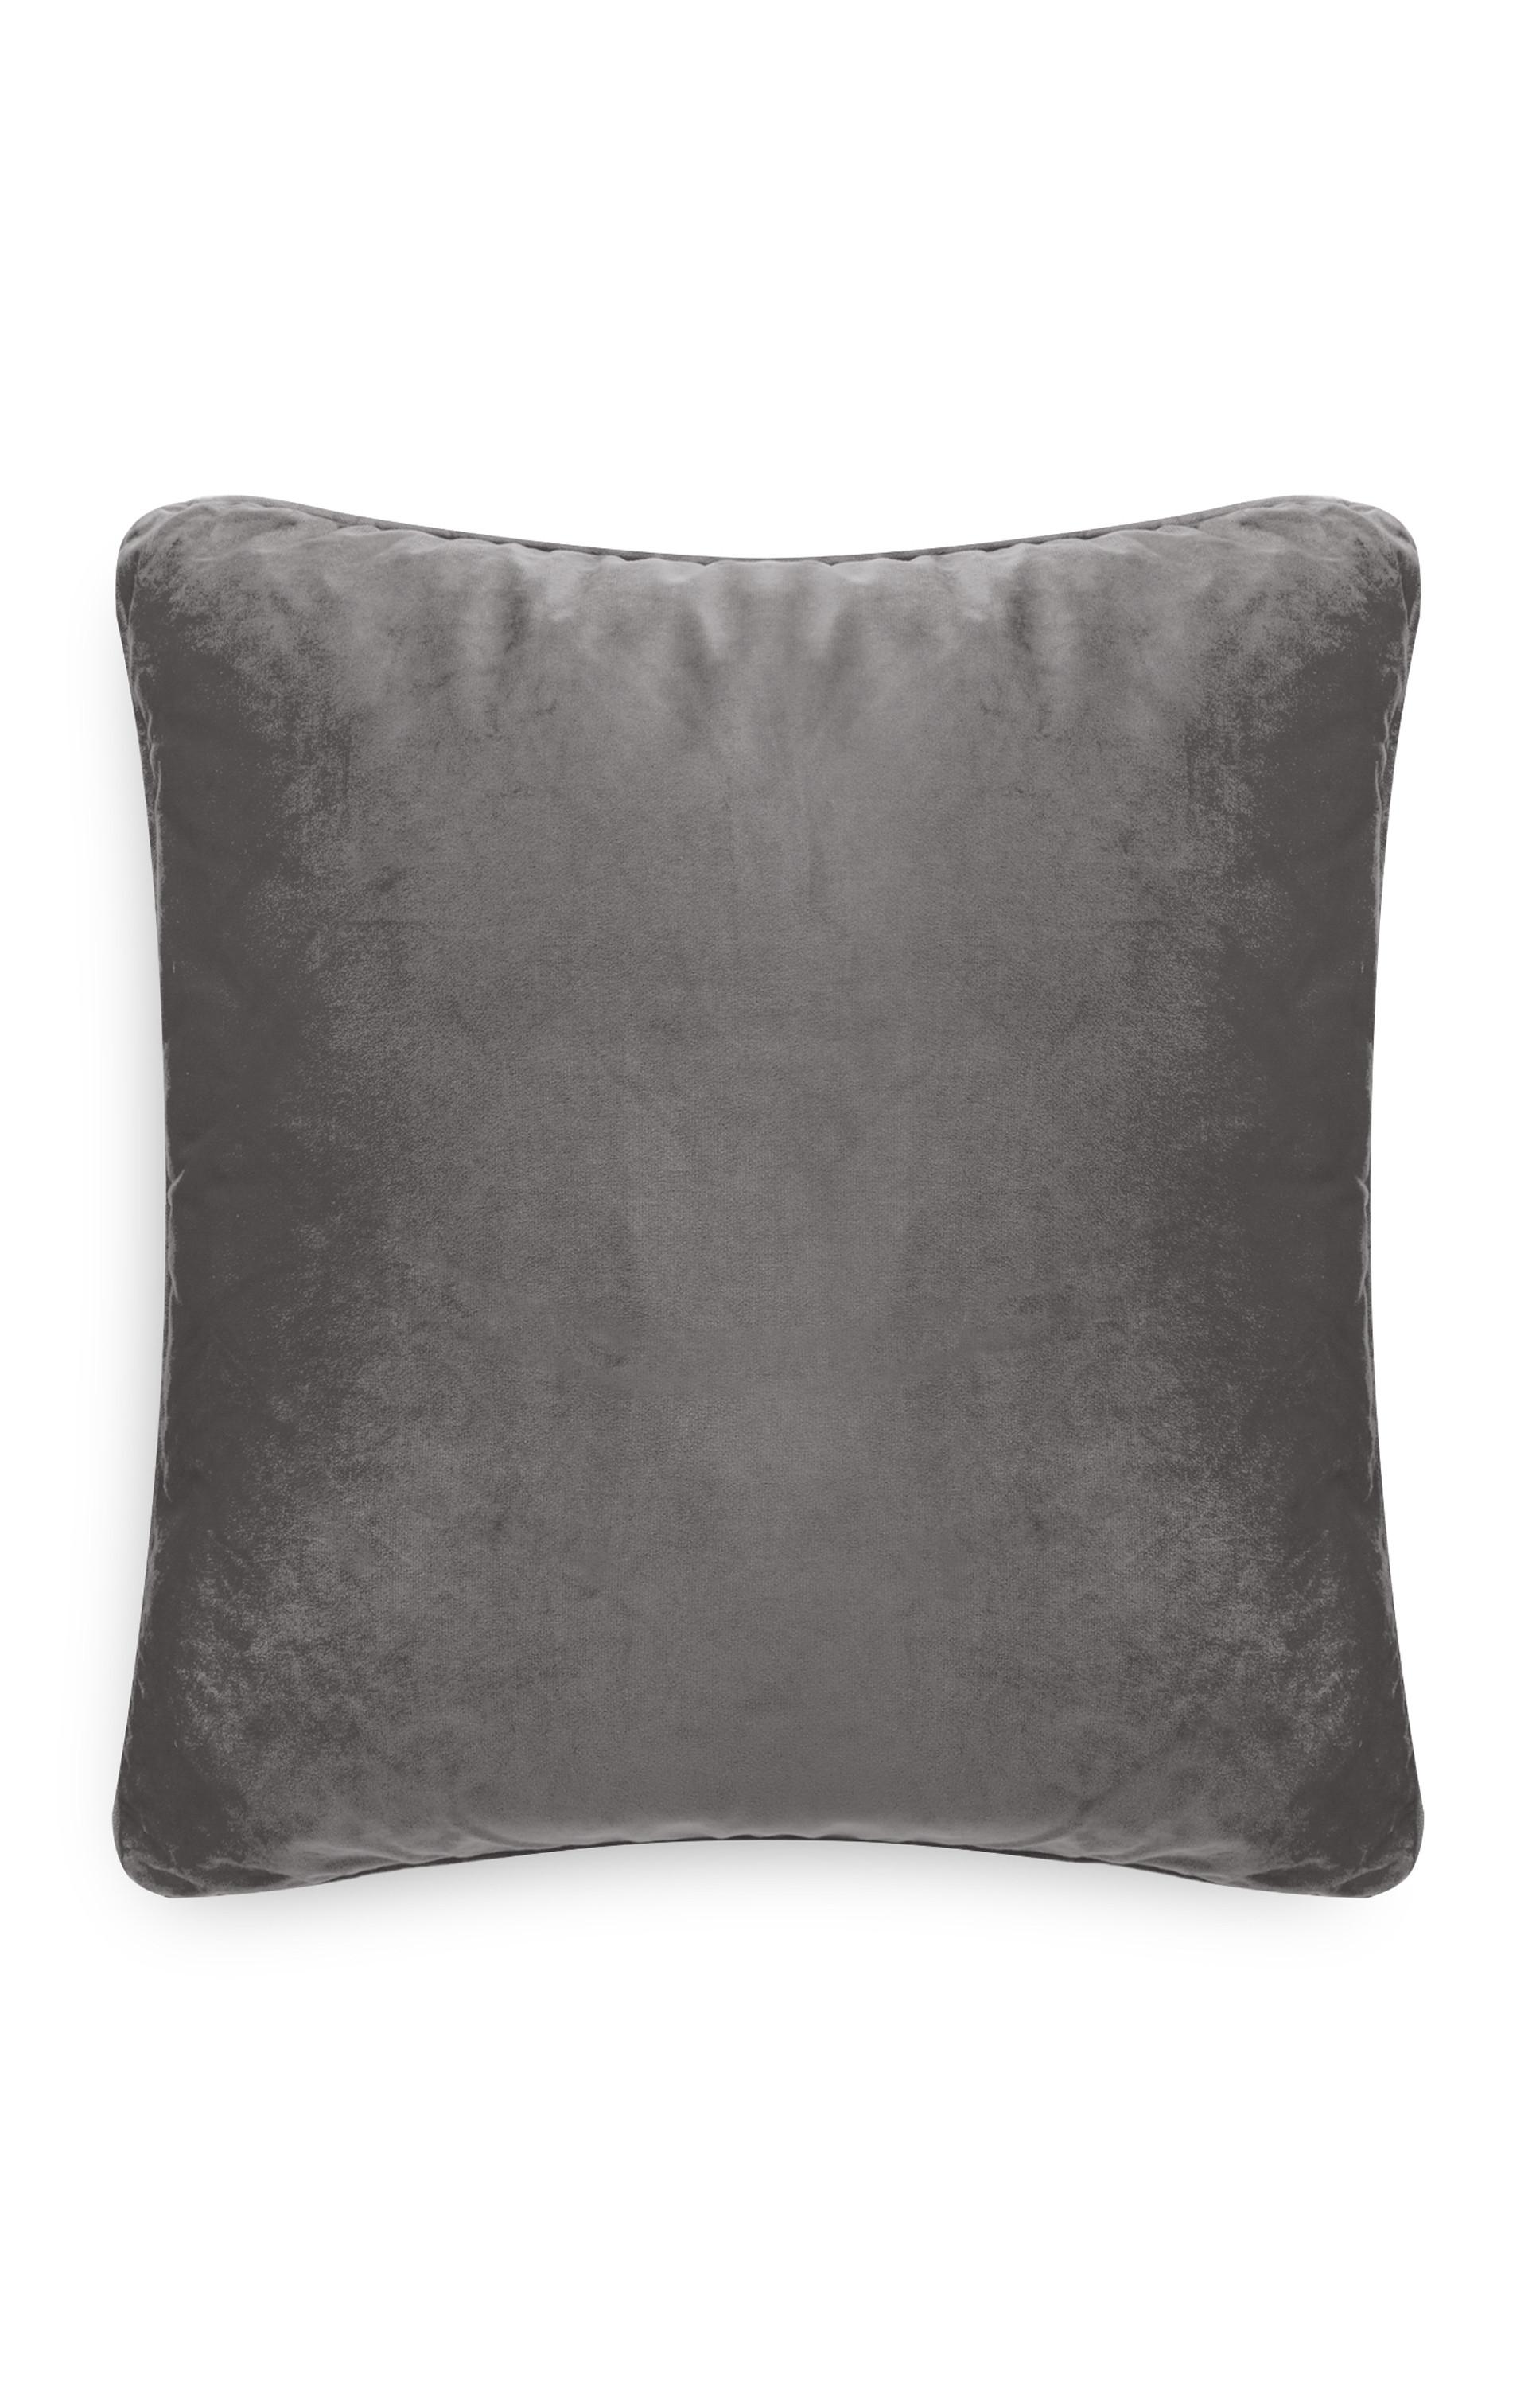 grey and pink scatter cushions